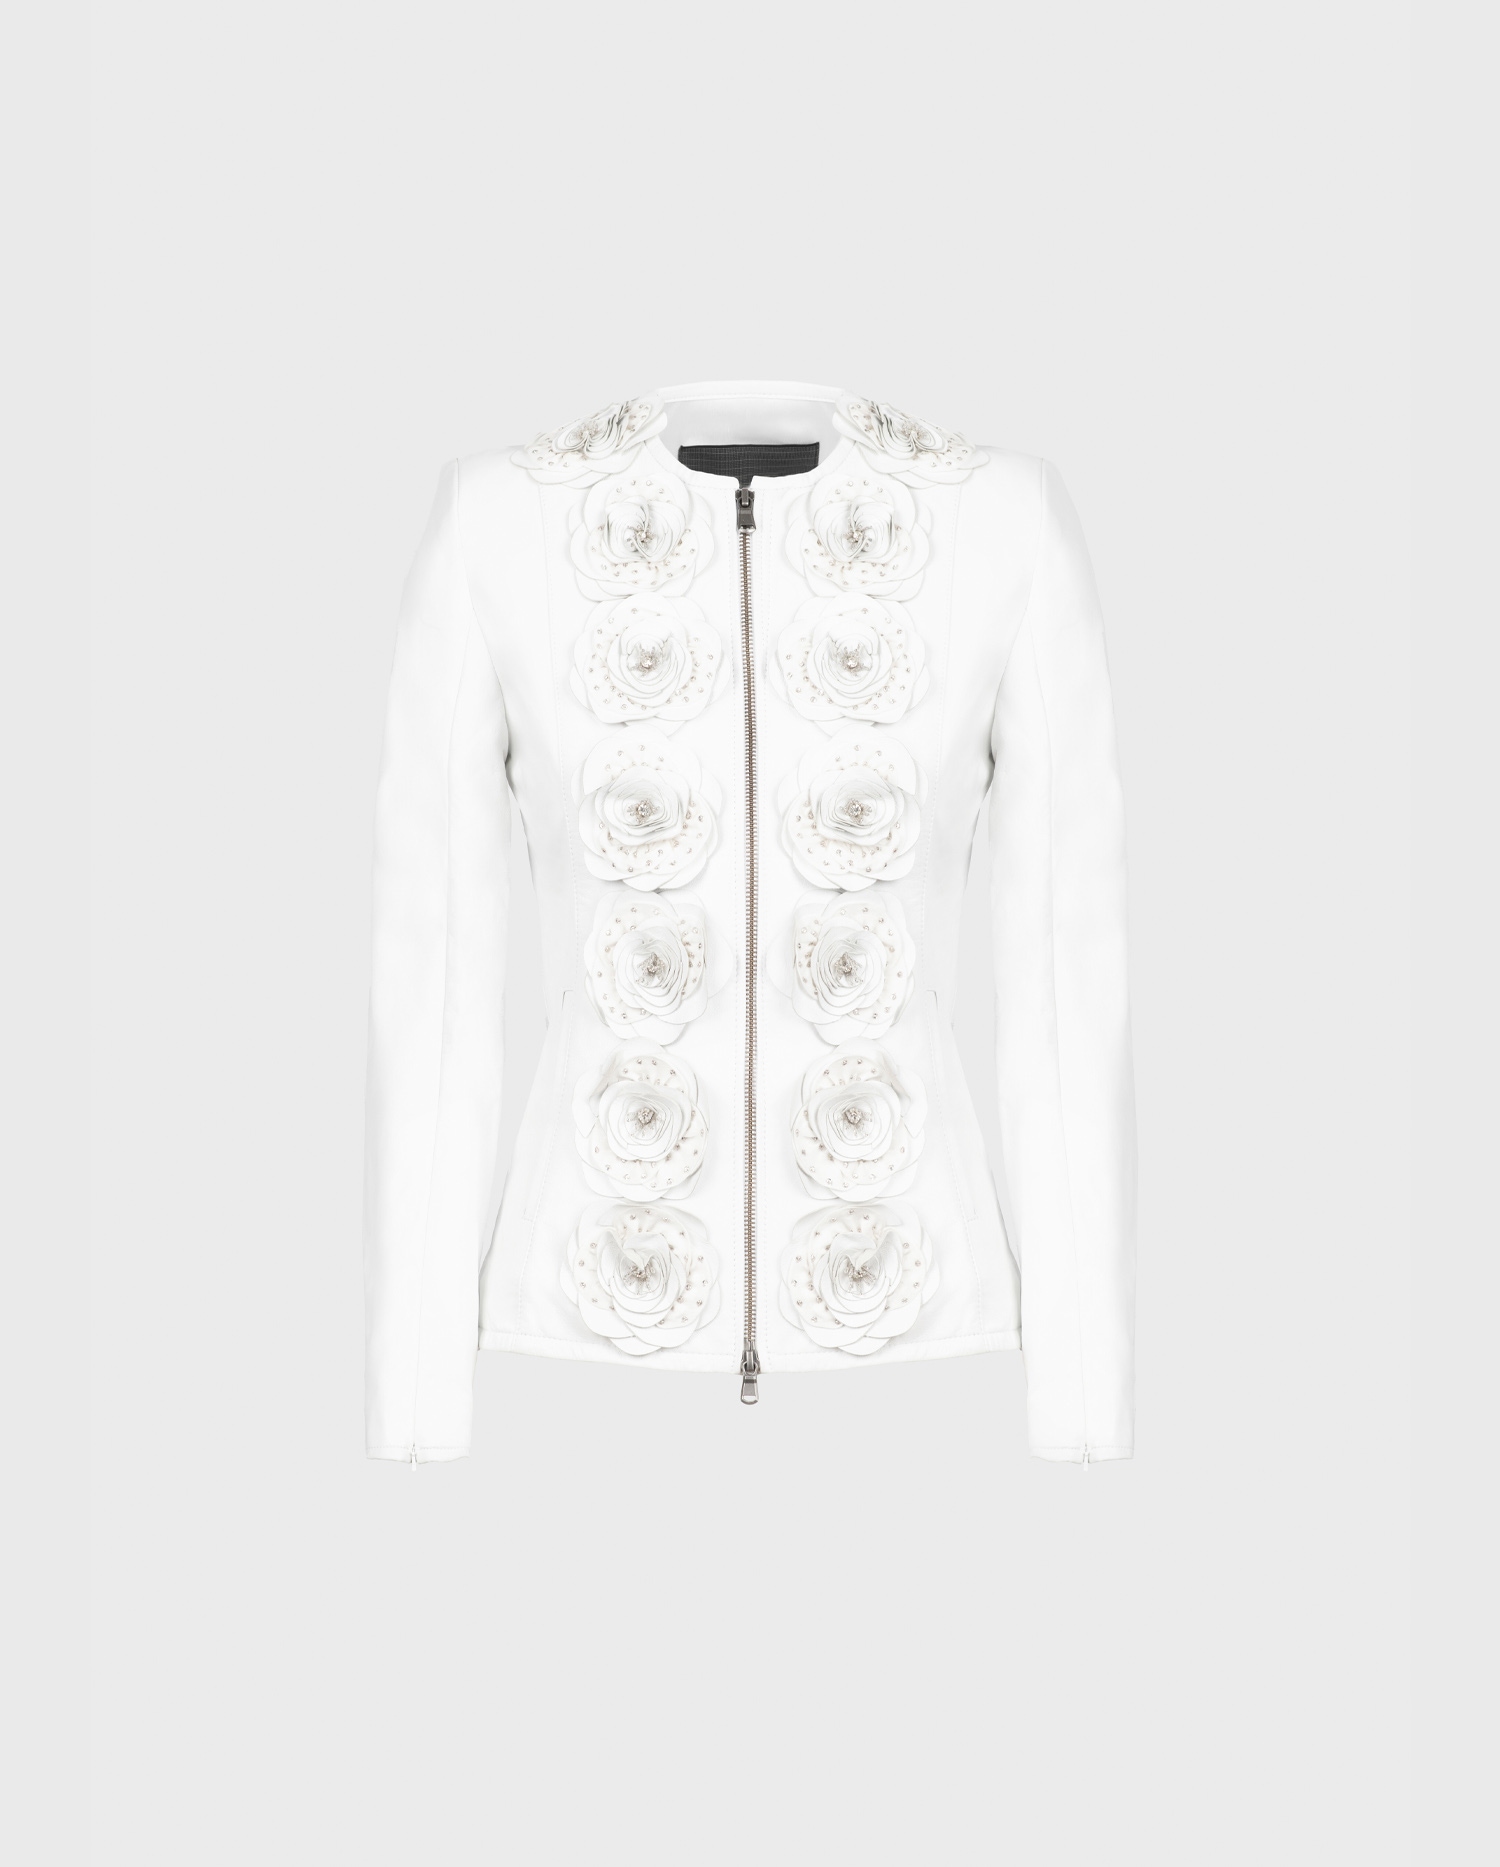 Discover the LORYNA white leather jacket with front flowers from ANNE FONTAINE